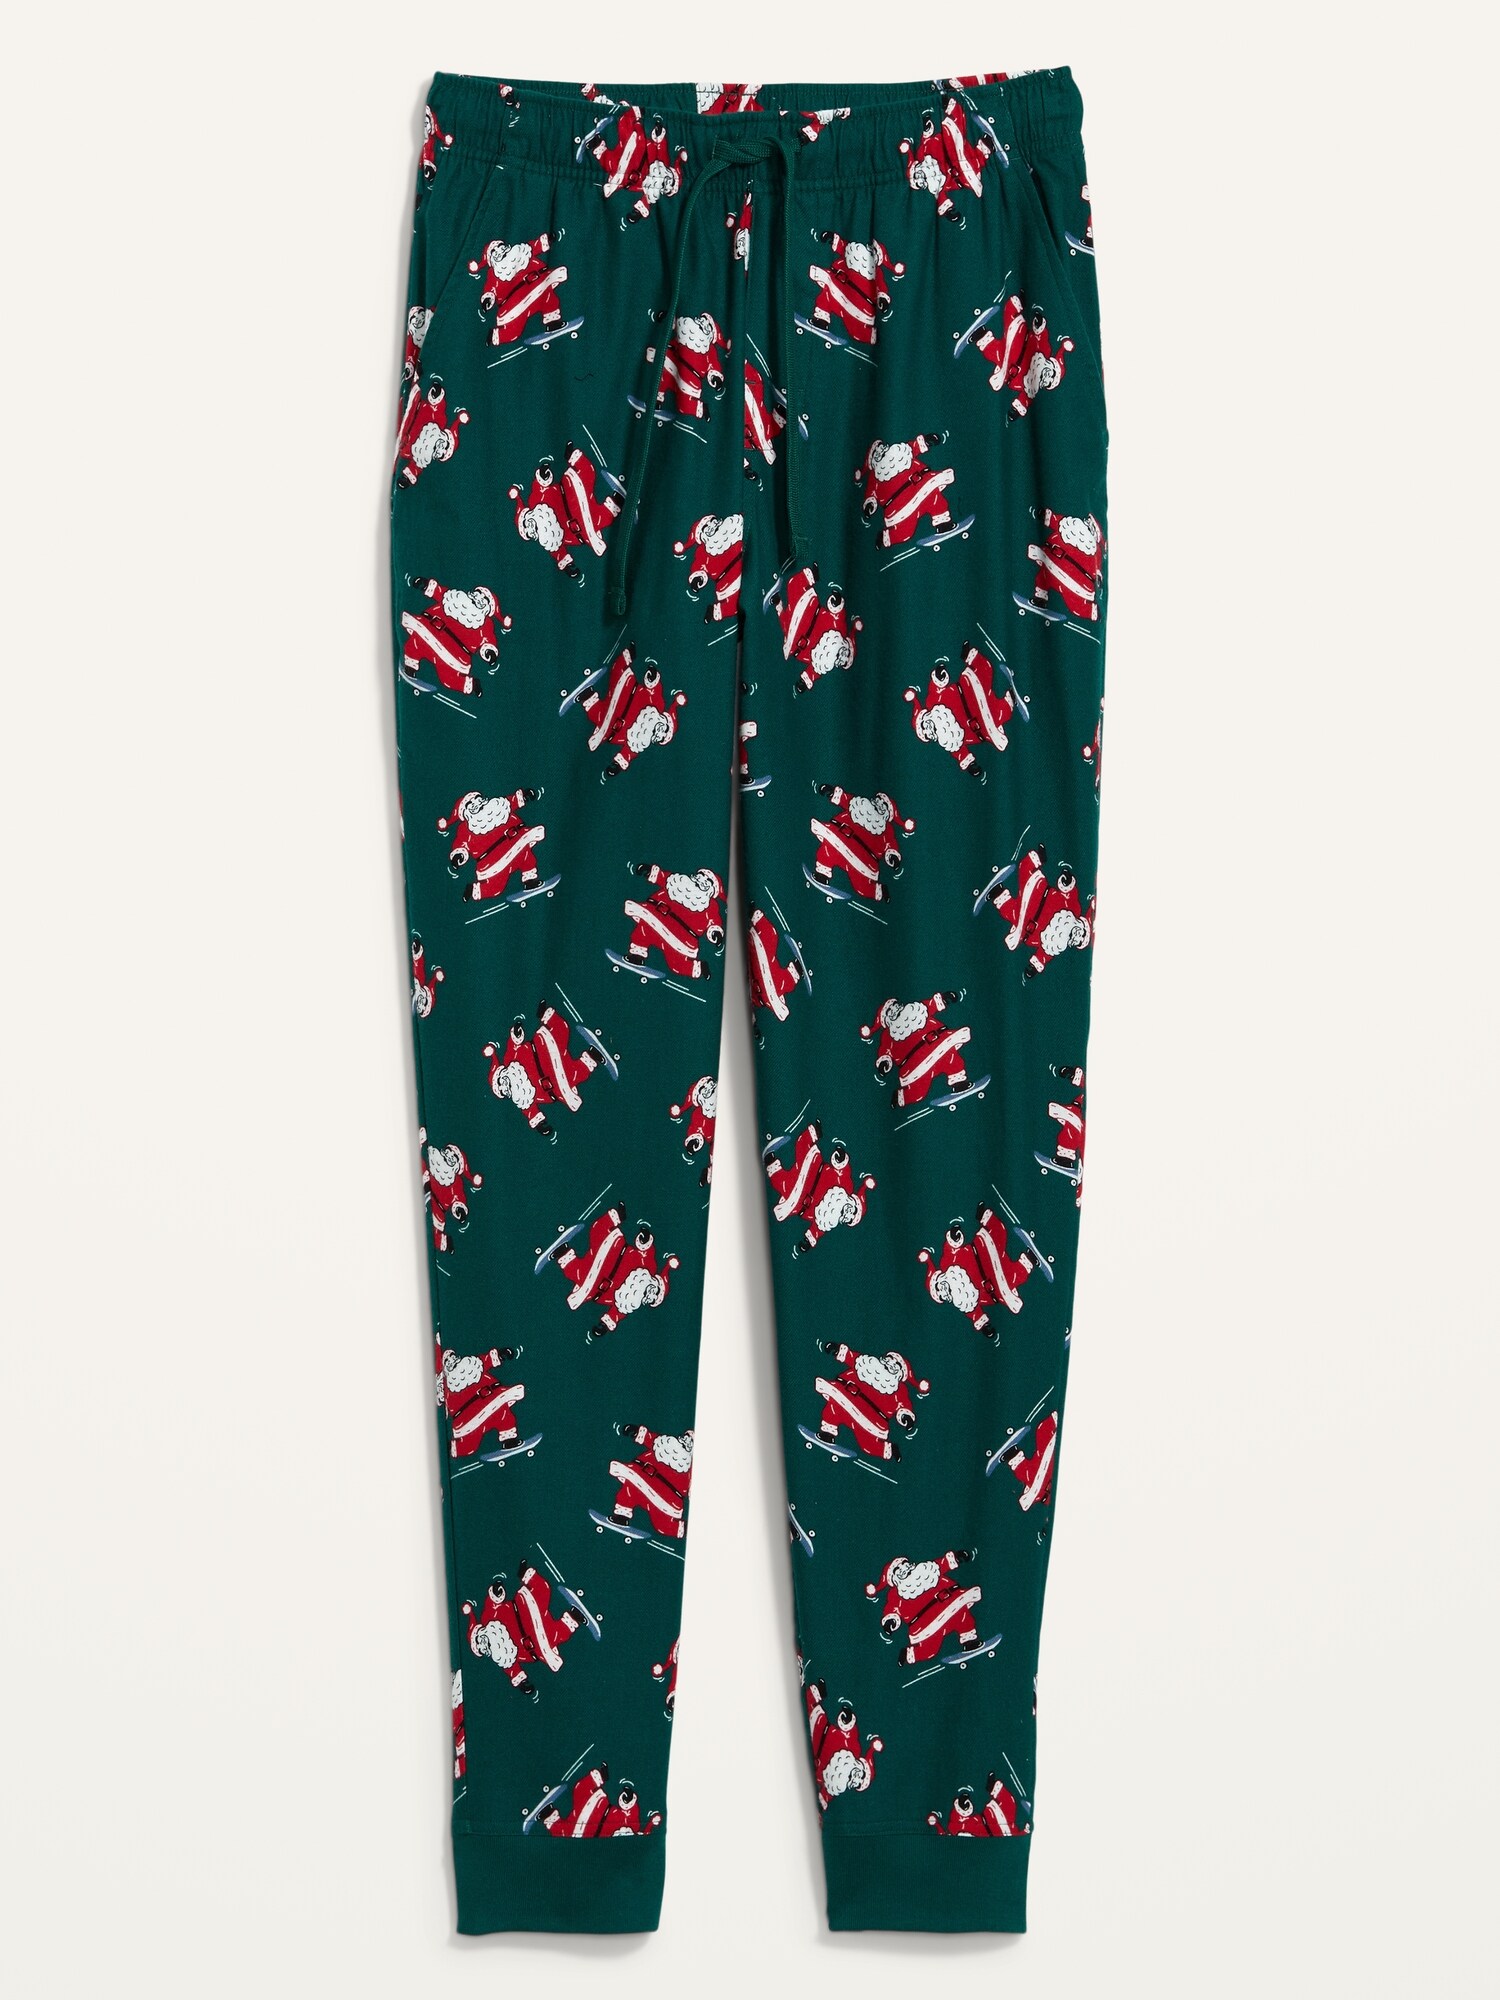 Matching Printed Flannel Jogger Pajama Pants For Men Old Navy 